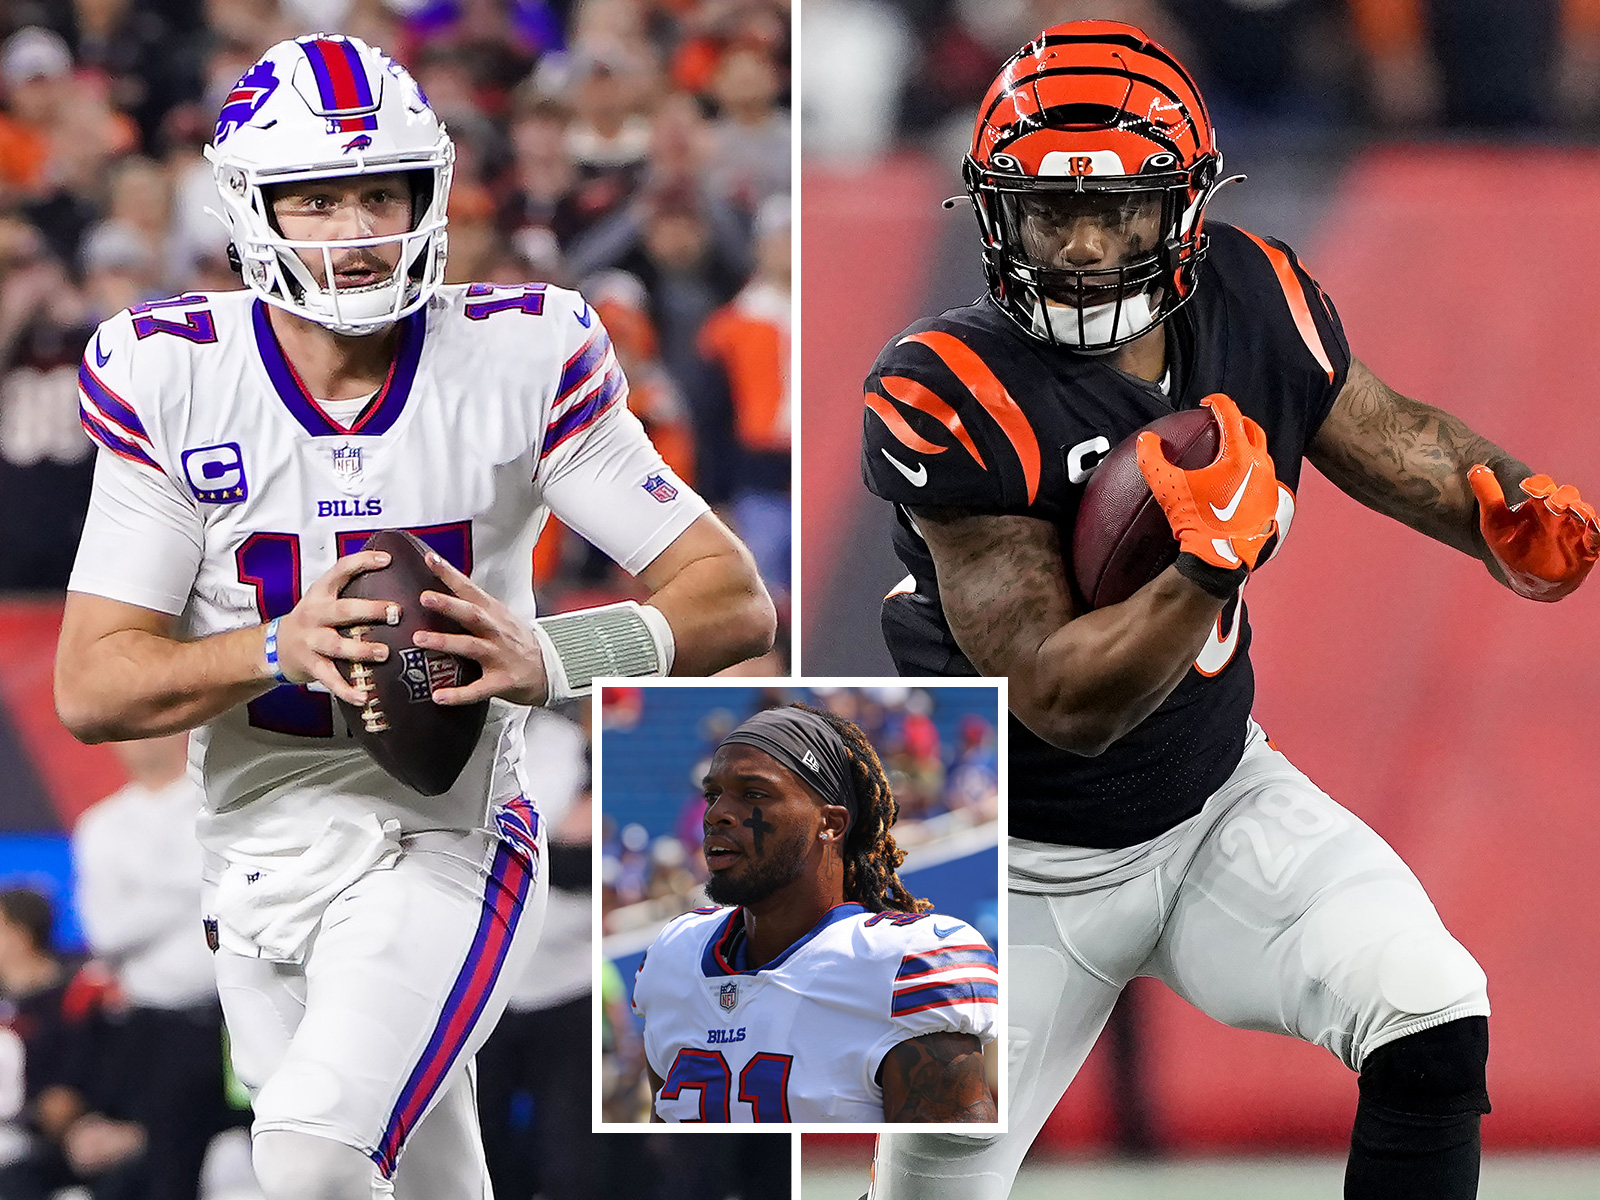 NFL considered neutral-site for Bengals-Bills playoff game